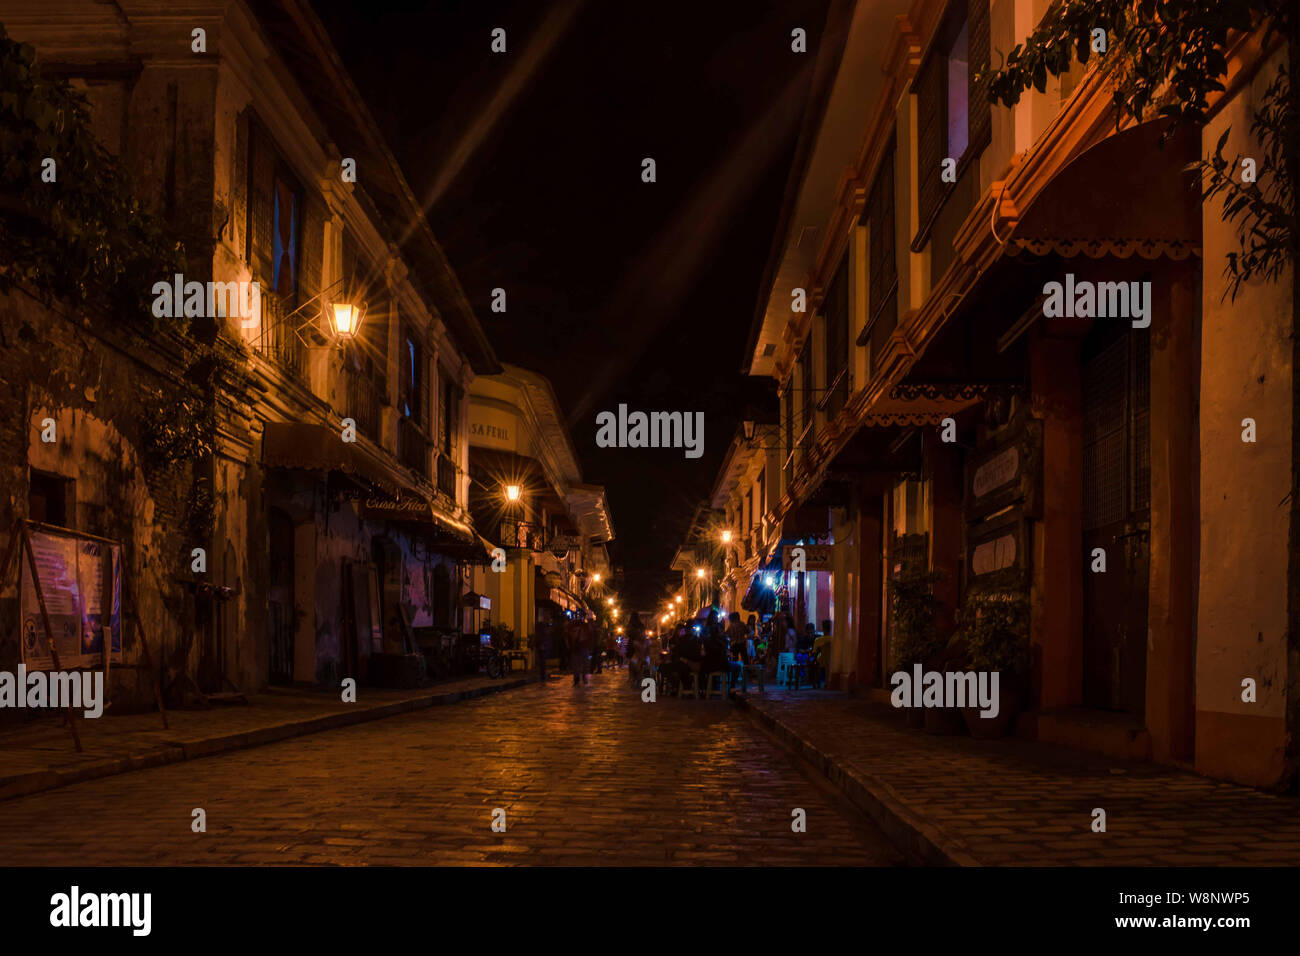 Vigan city. Vigan, Philippines - July 14, 2019: The City of Vigan at night. It is a World Heritage Site in that it is one of the few Hispanic towns le Stock Photo